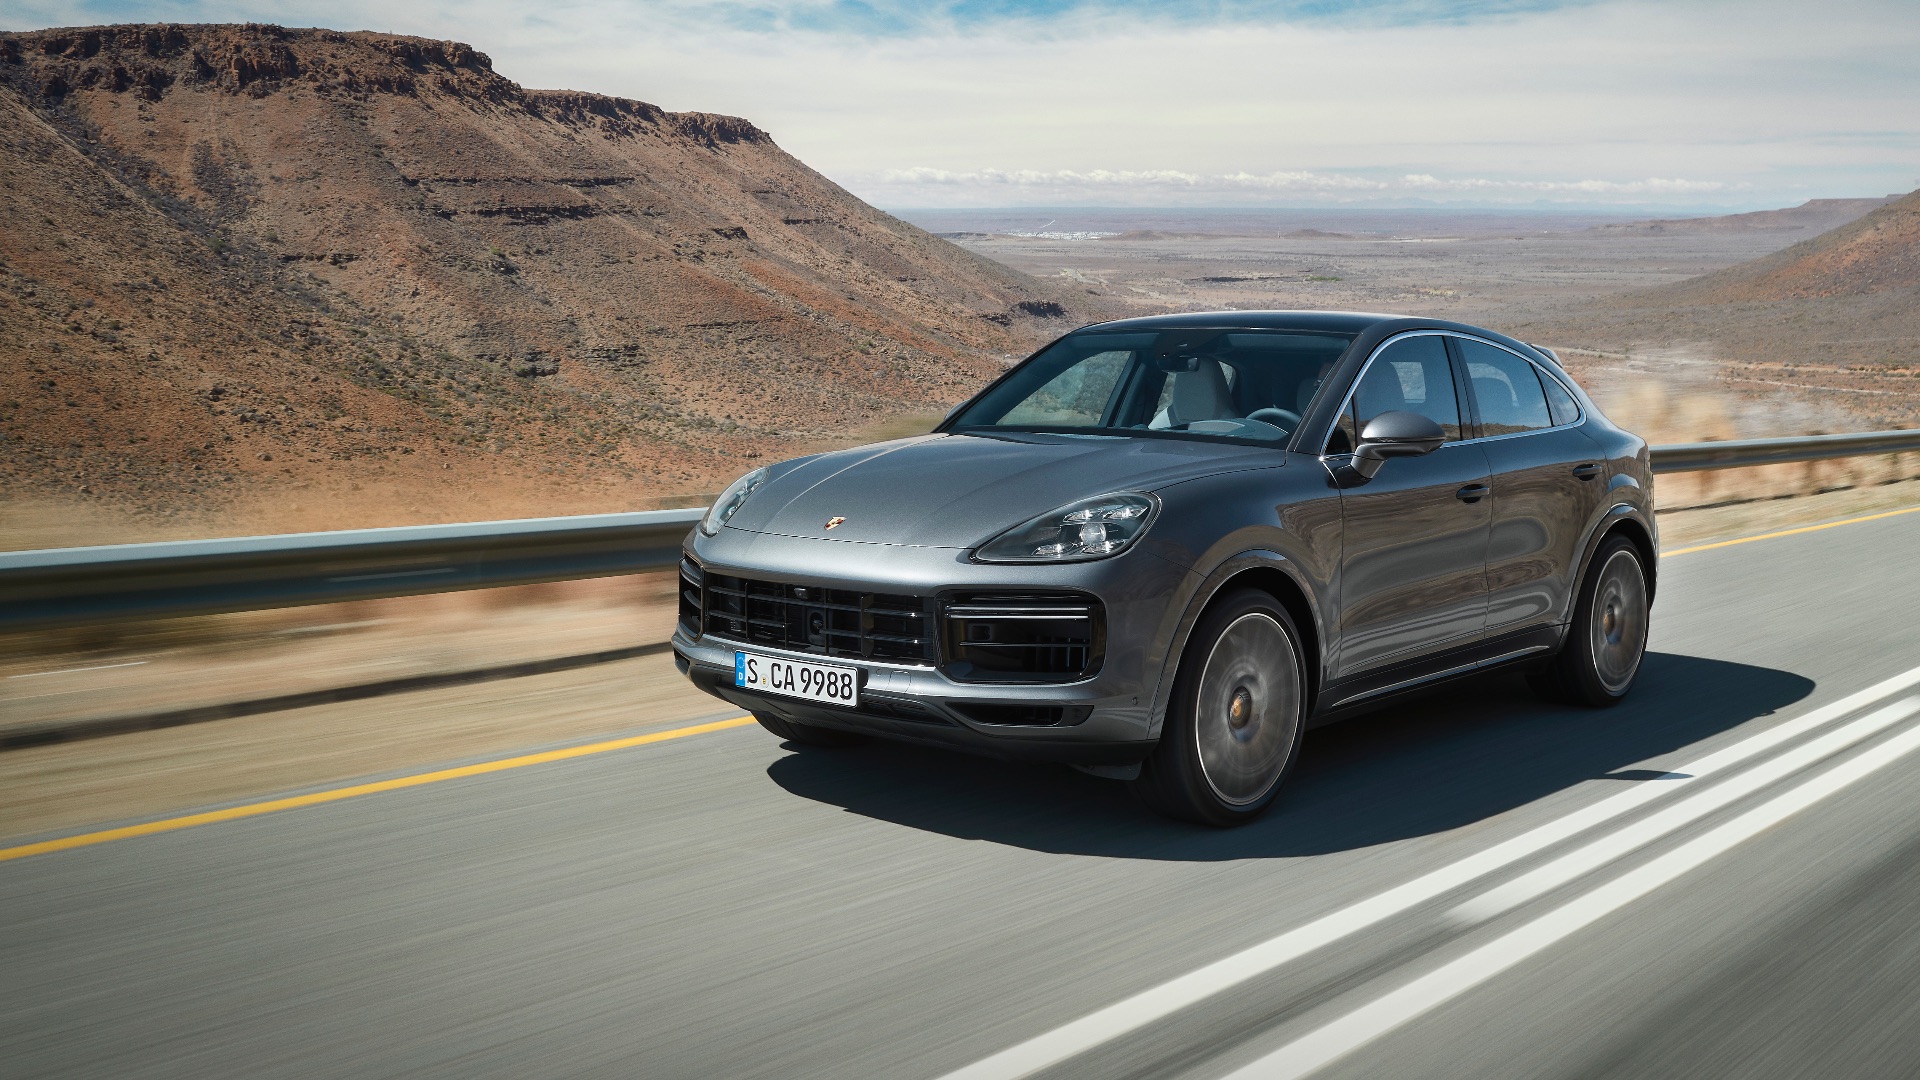 2020 Porsche Cayenne Coupe: Here's everything you need to know